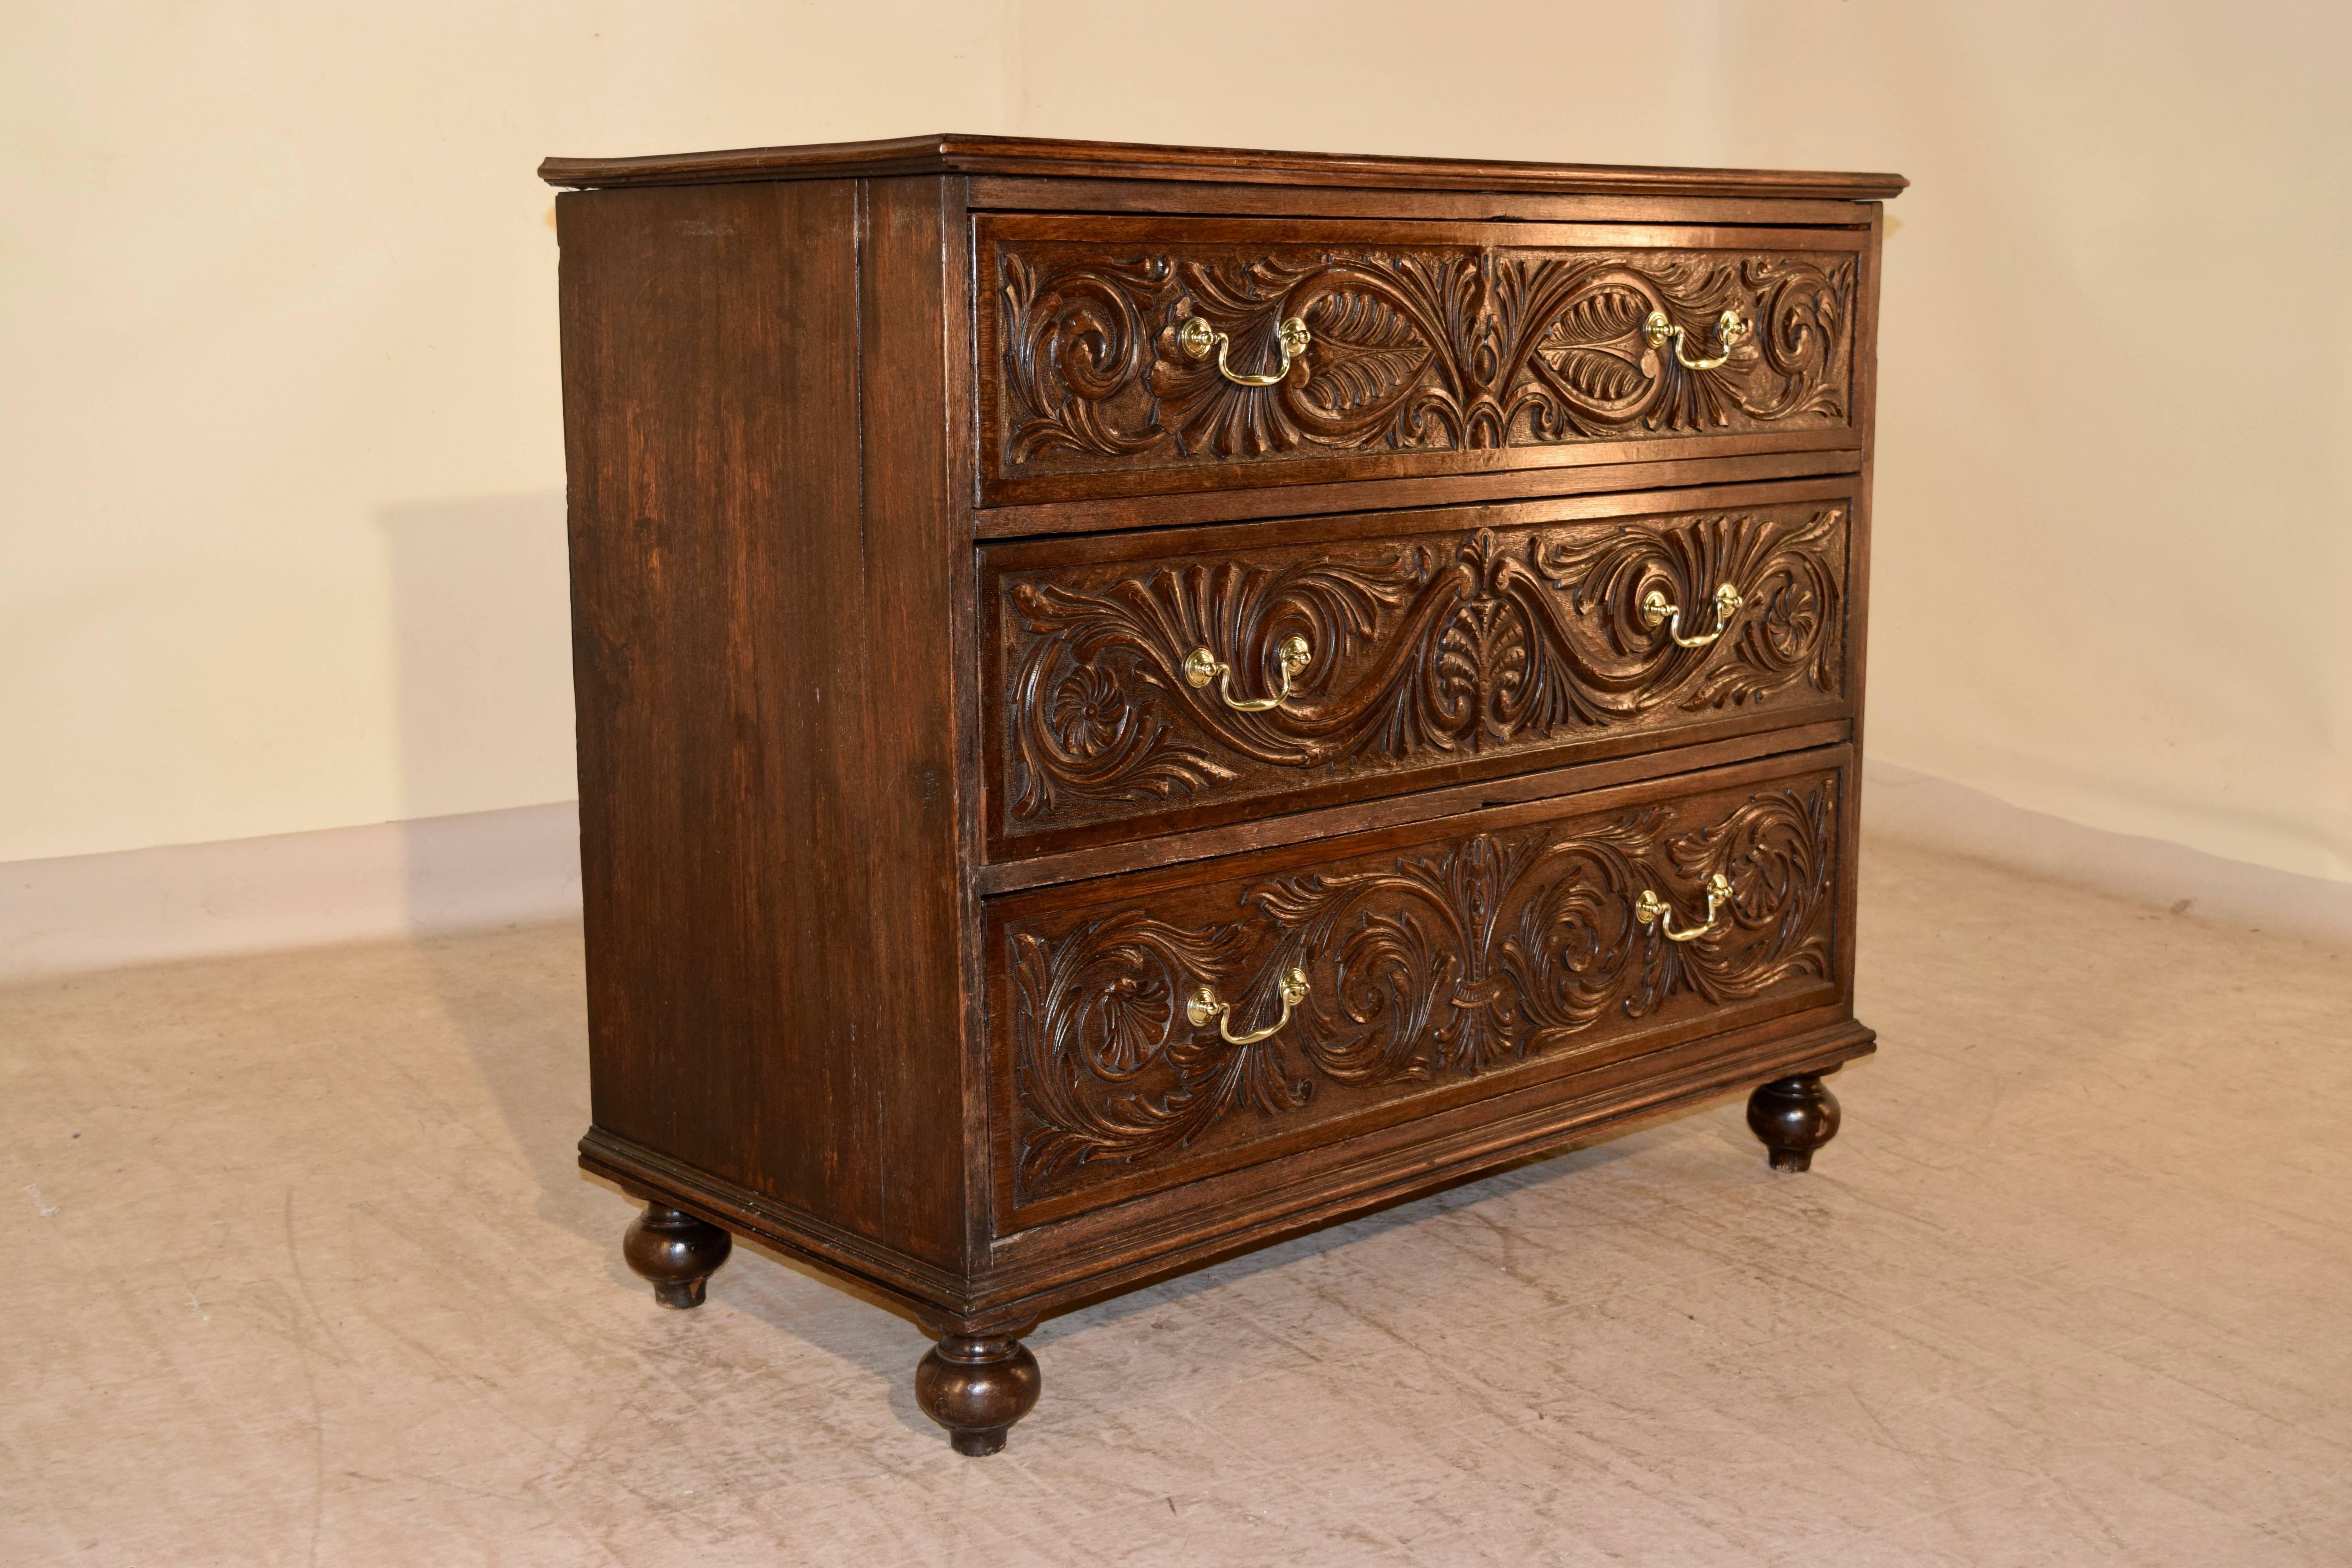 Early 19th century English oak chest of drawers with a beveled edge around the top, following down to three drawers with hand- carved decorated drawer fronts. The sides are simple and have age shrinkage. The case is raised on turned feet.